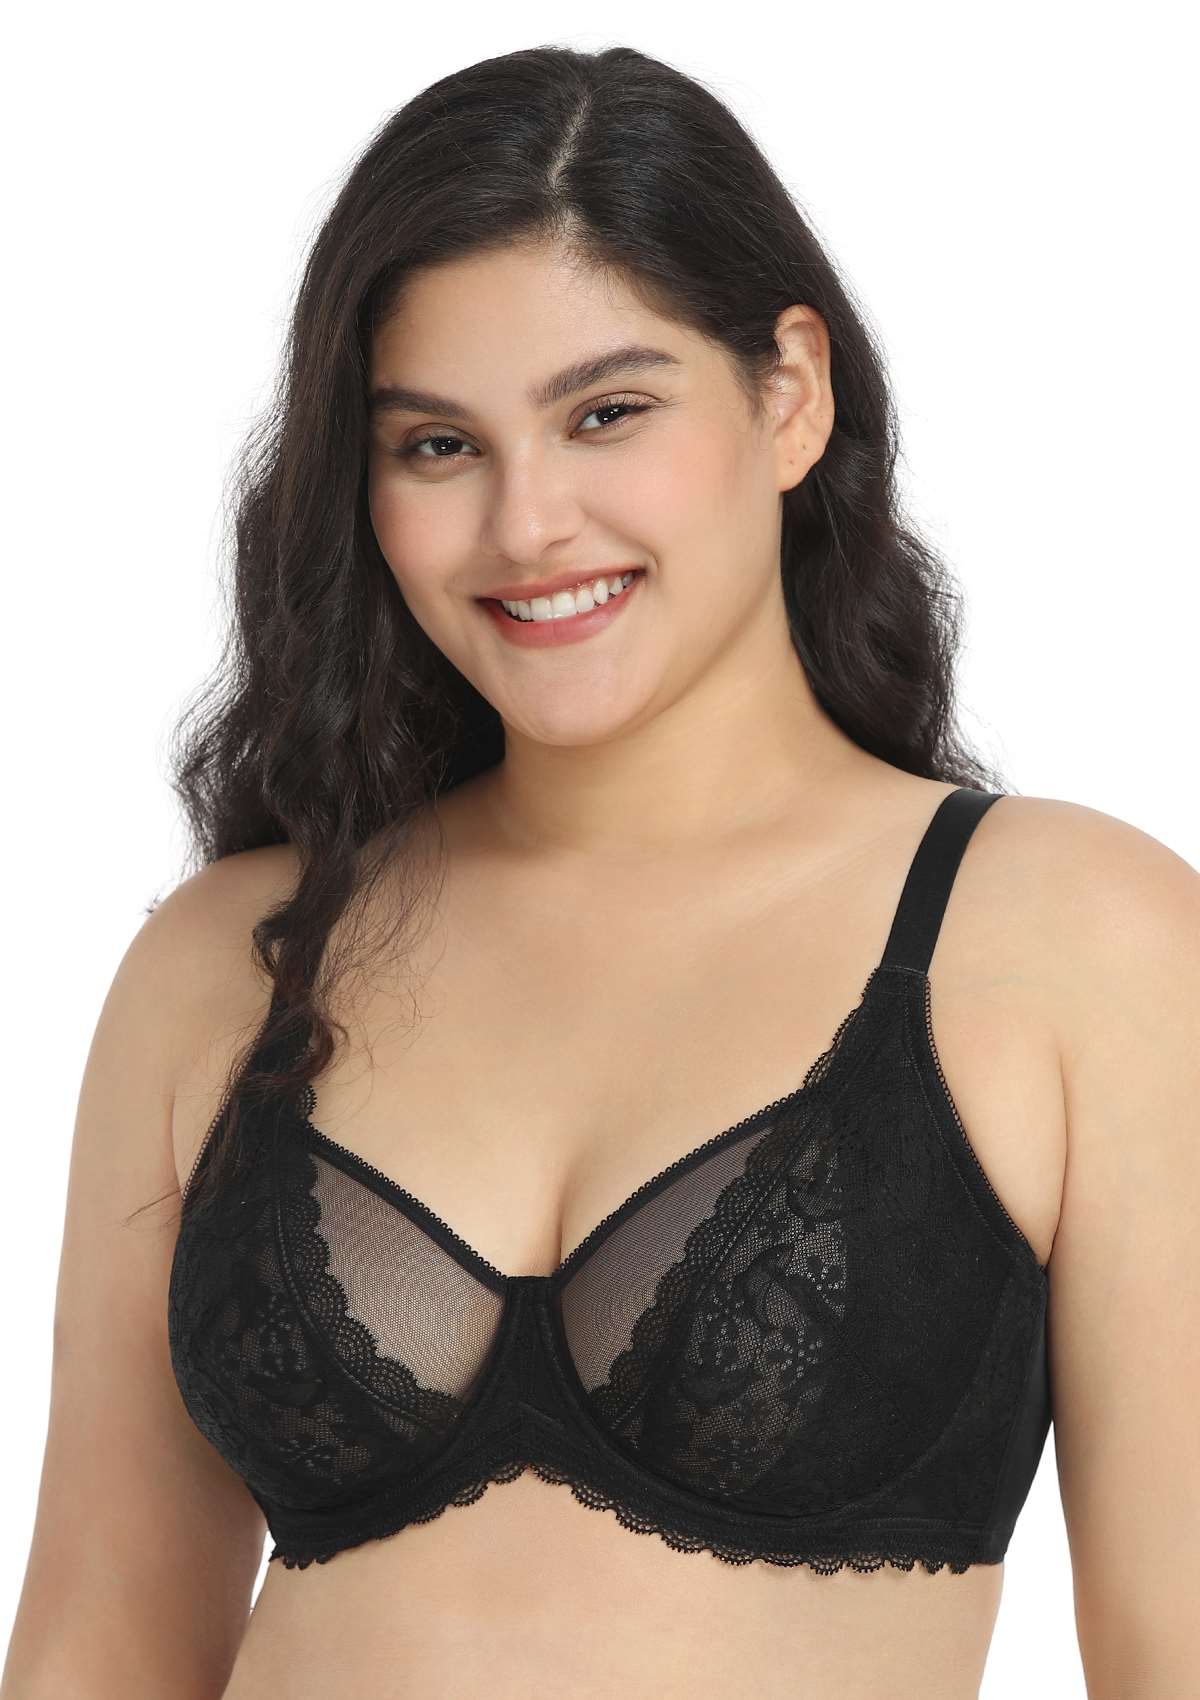 HSIA Anemone Big Bra: Best Bra For Lift And Support, Floral Bra - Black / 36 / C